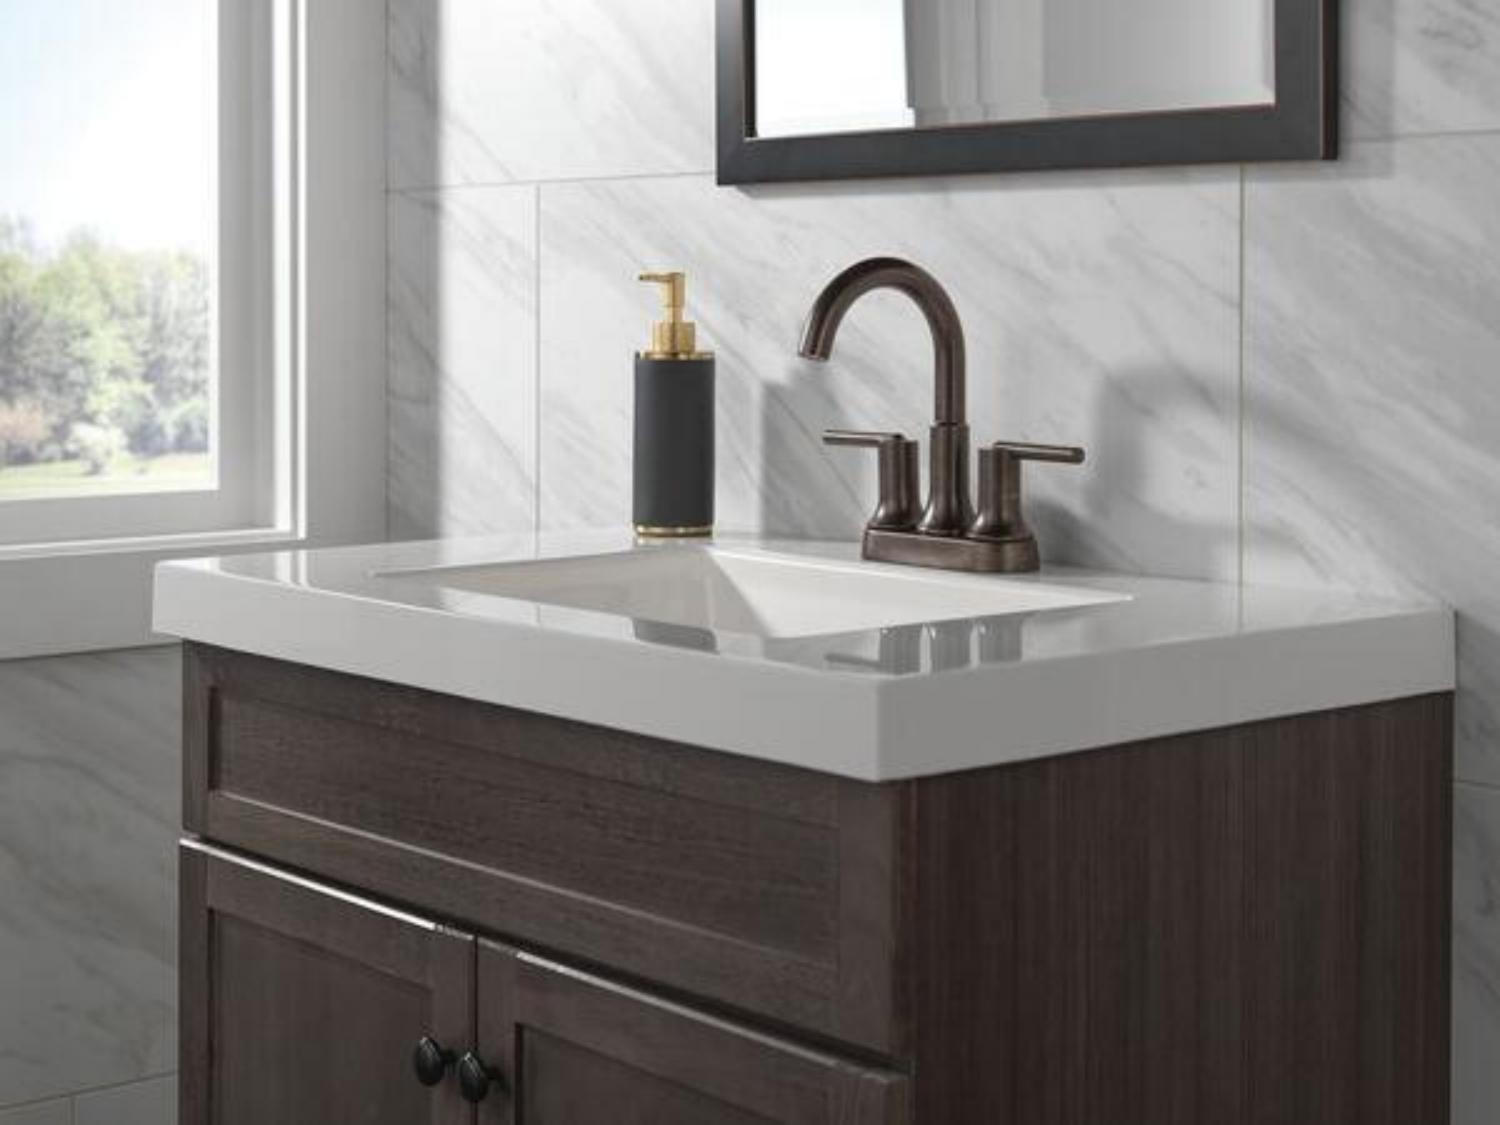 2023 Centerset Bathroom Faucets: Completely Style and Functionality - Blog - 3